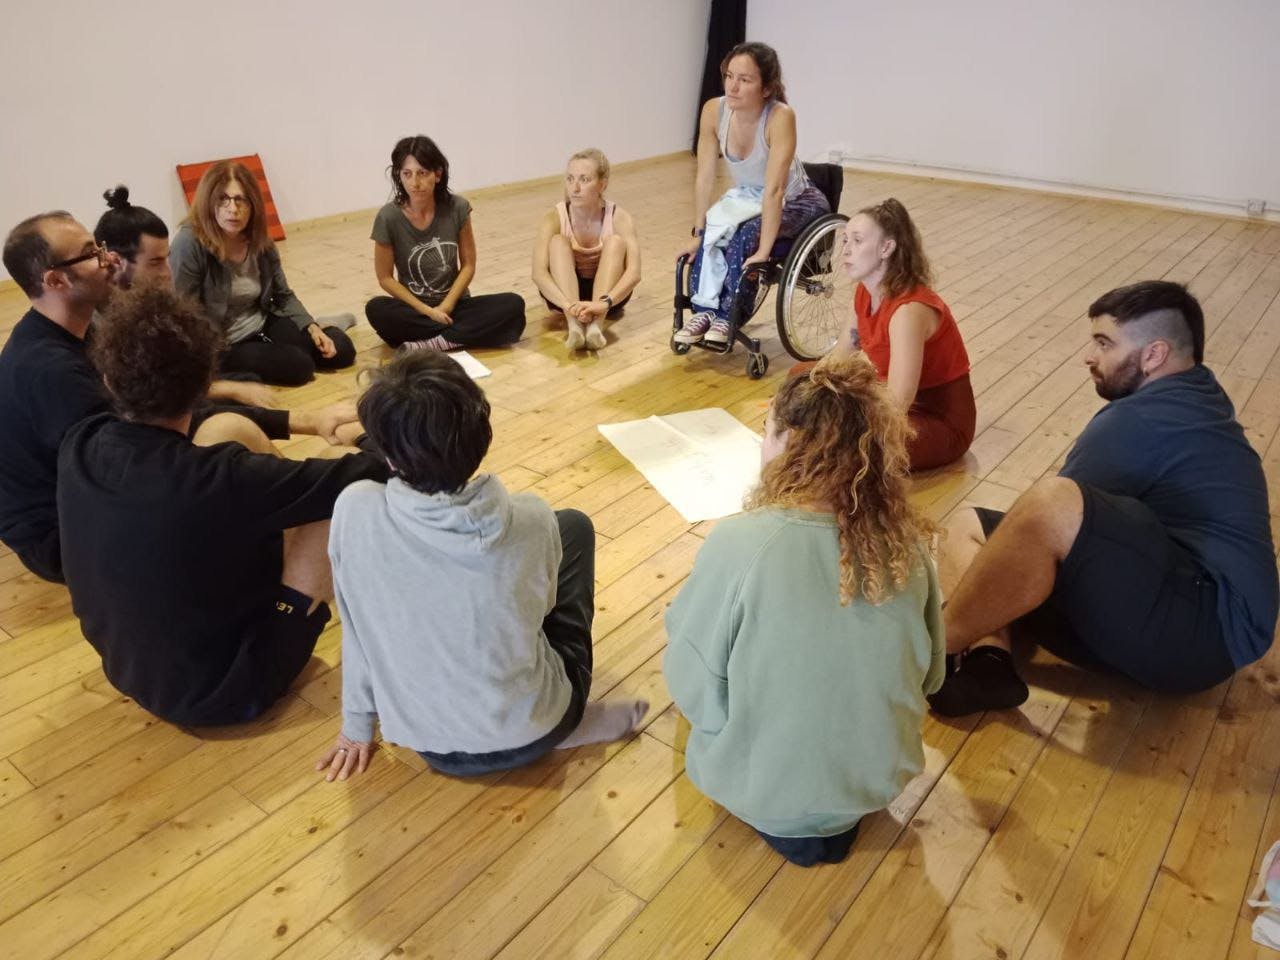 Artists and trainers confront each other in a circle